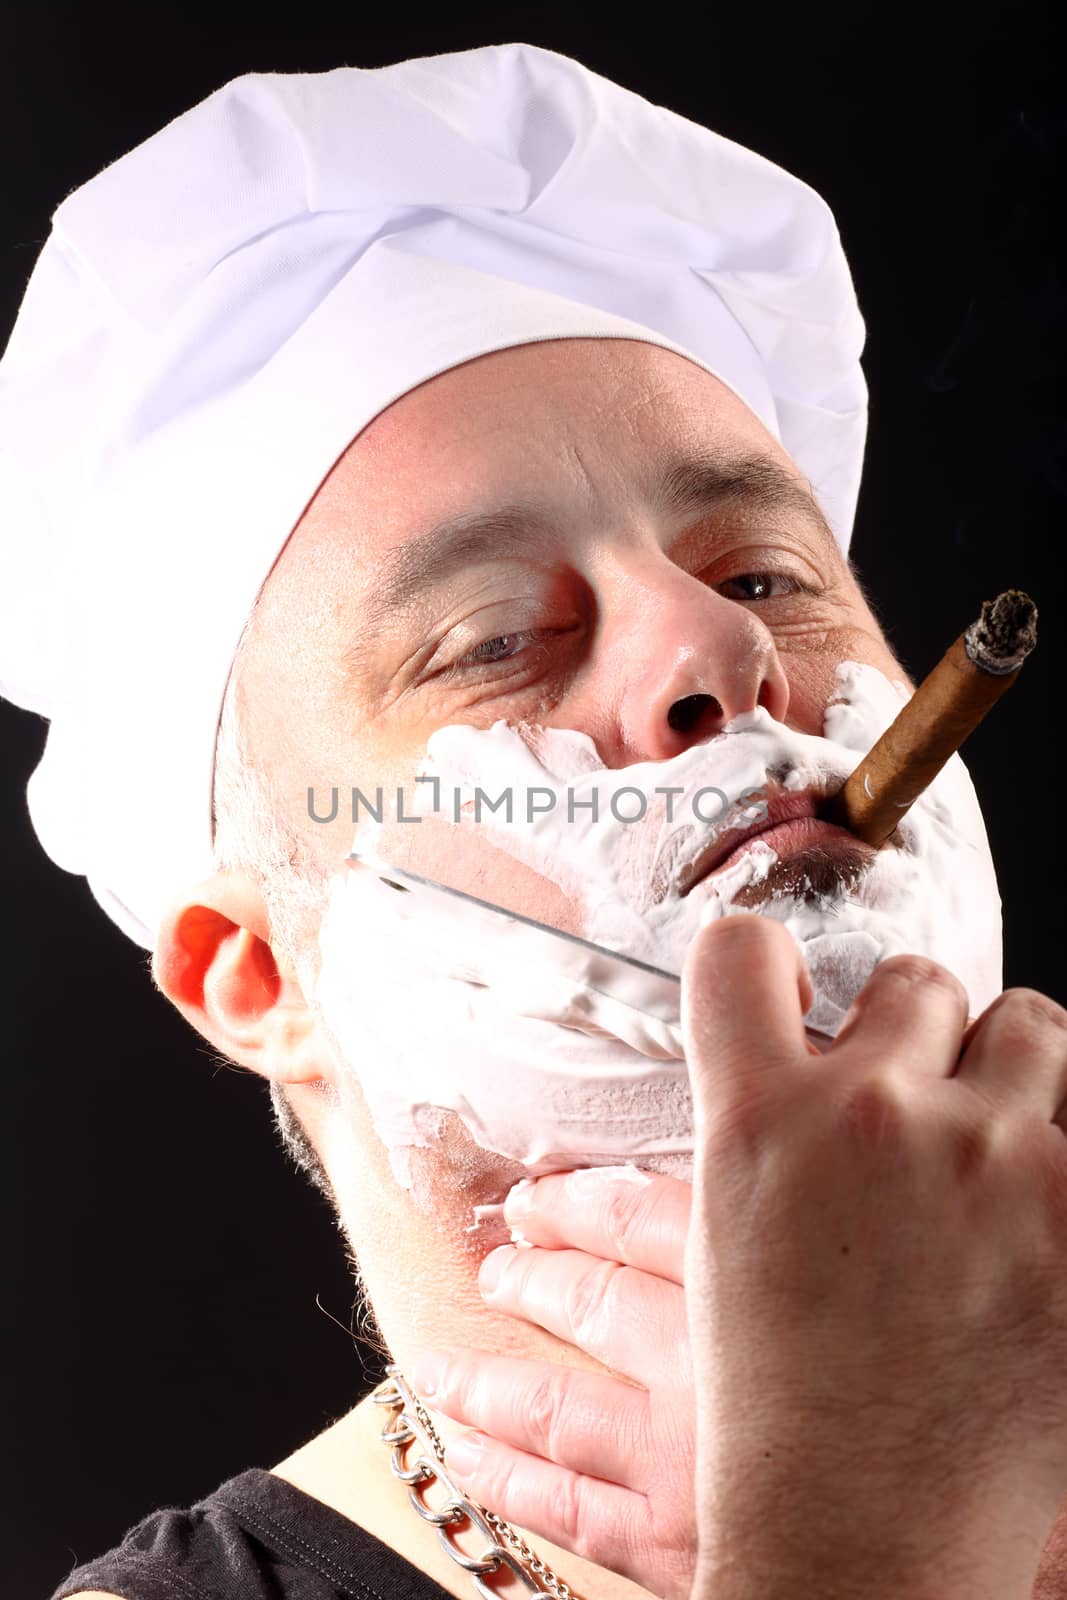 chef shaves with chopper by alexkosev